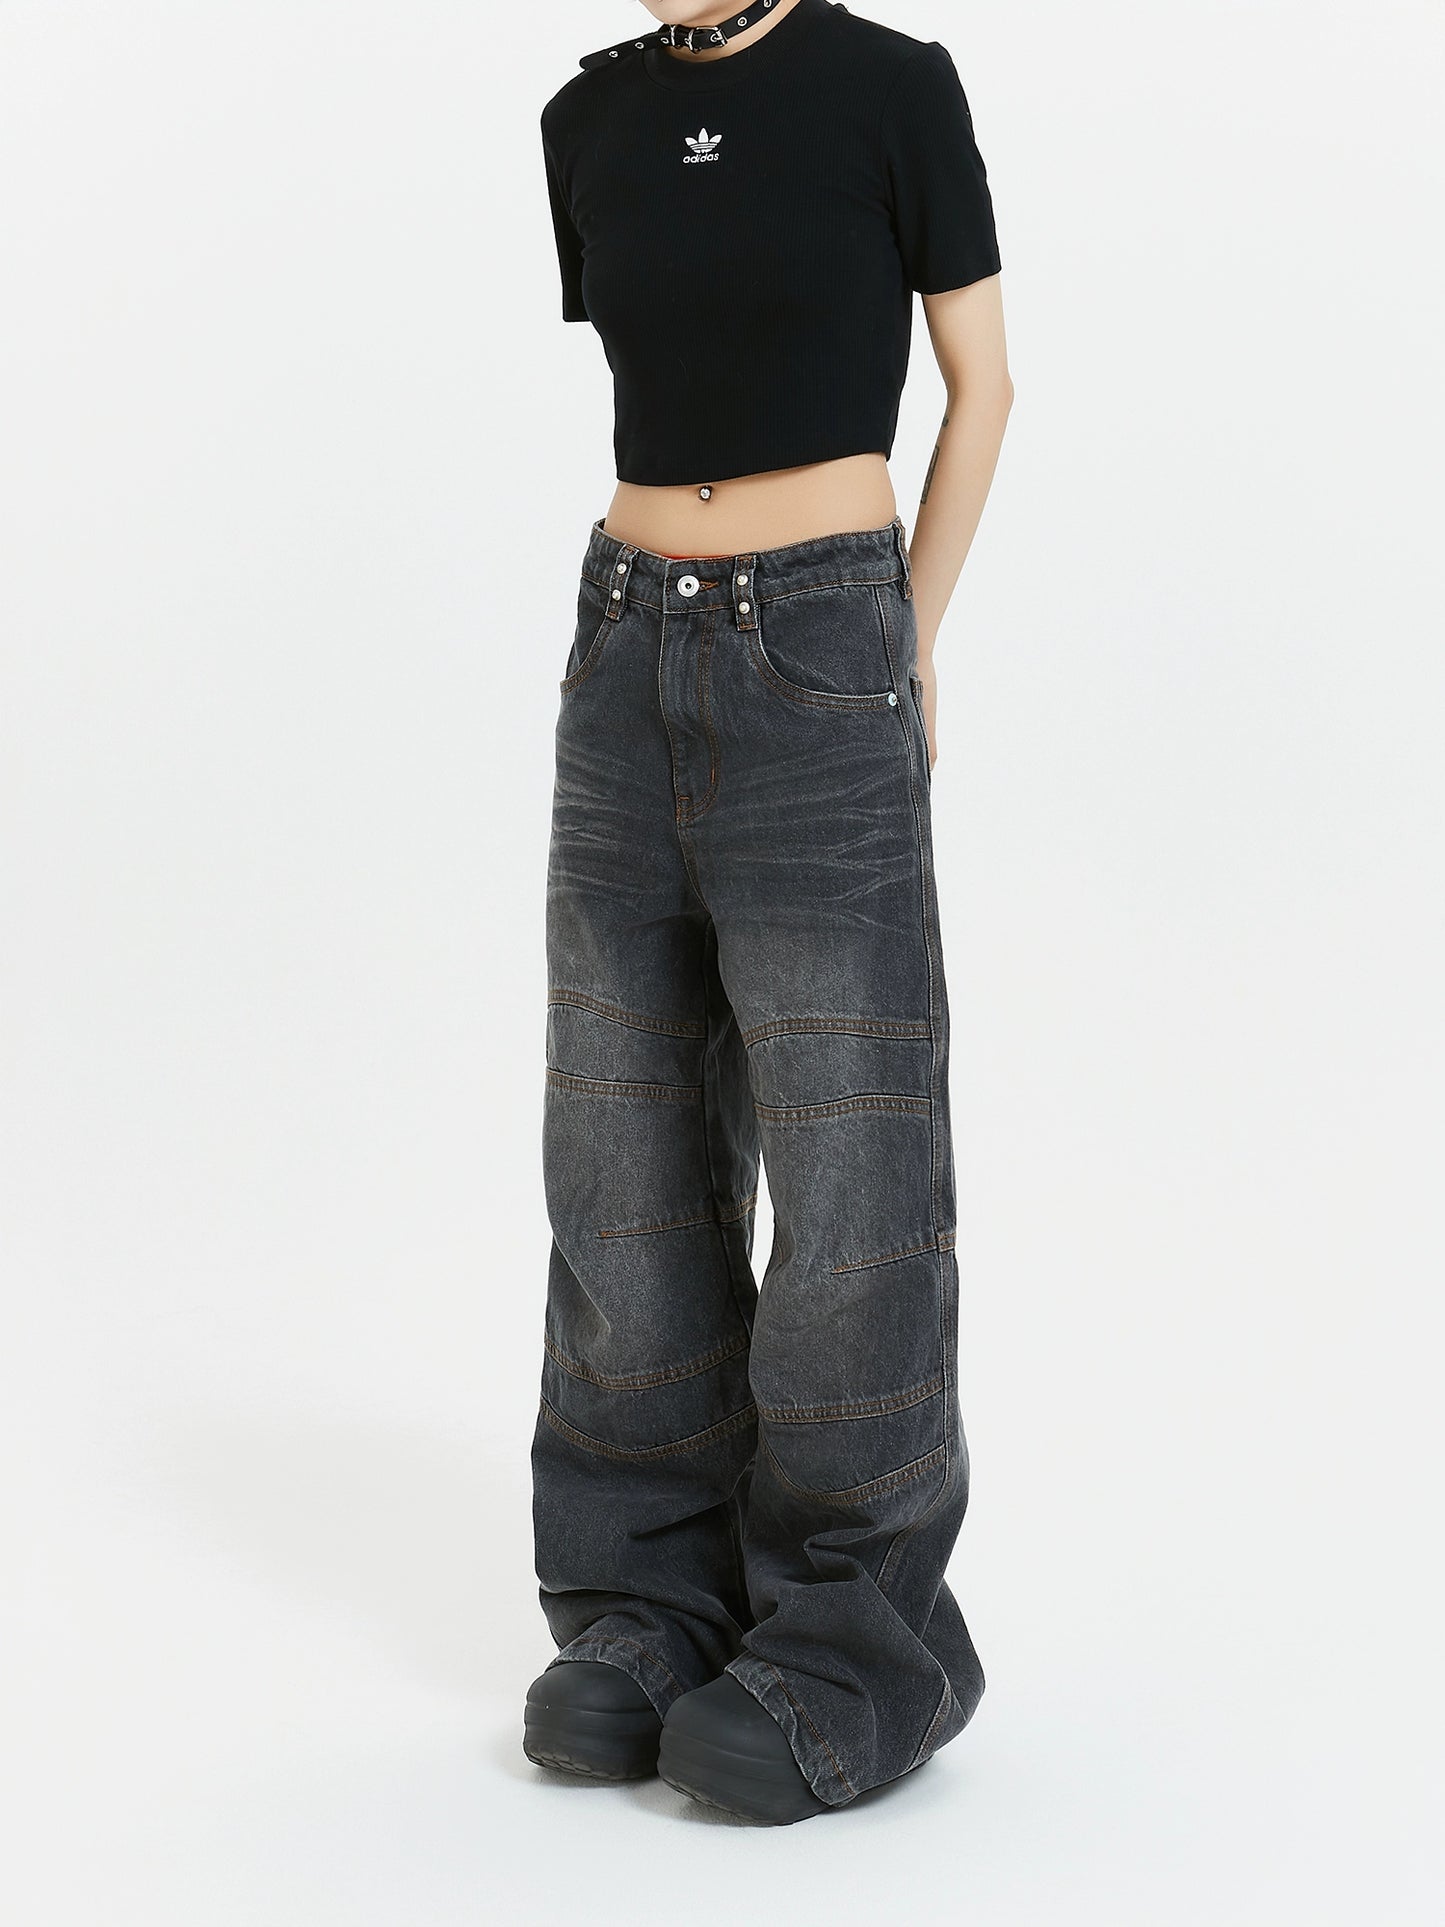 MICHINNYON American vintage high street niche wash distressed multi-strand deconstructed split panelled jeans